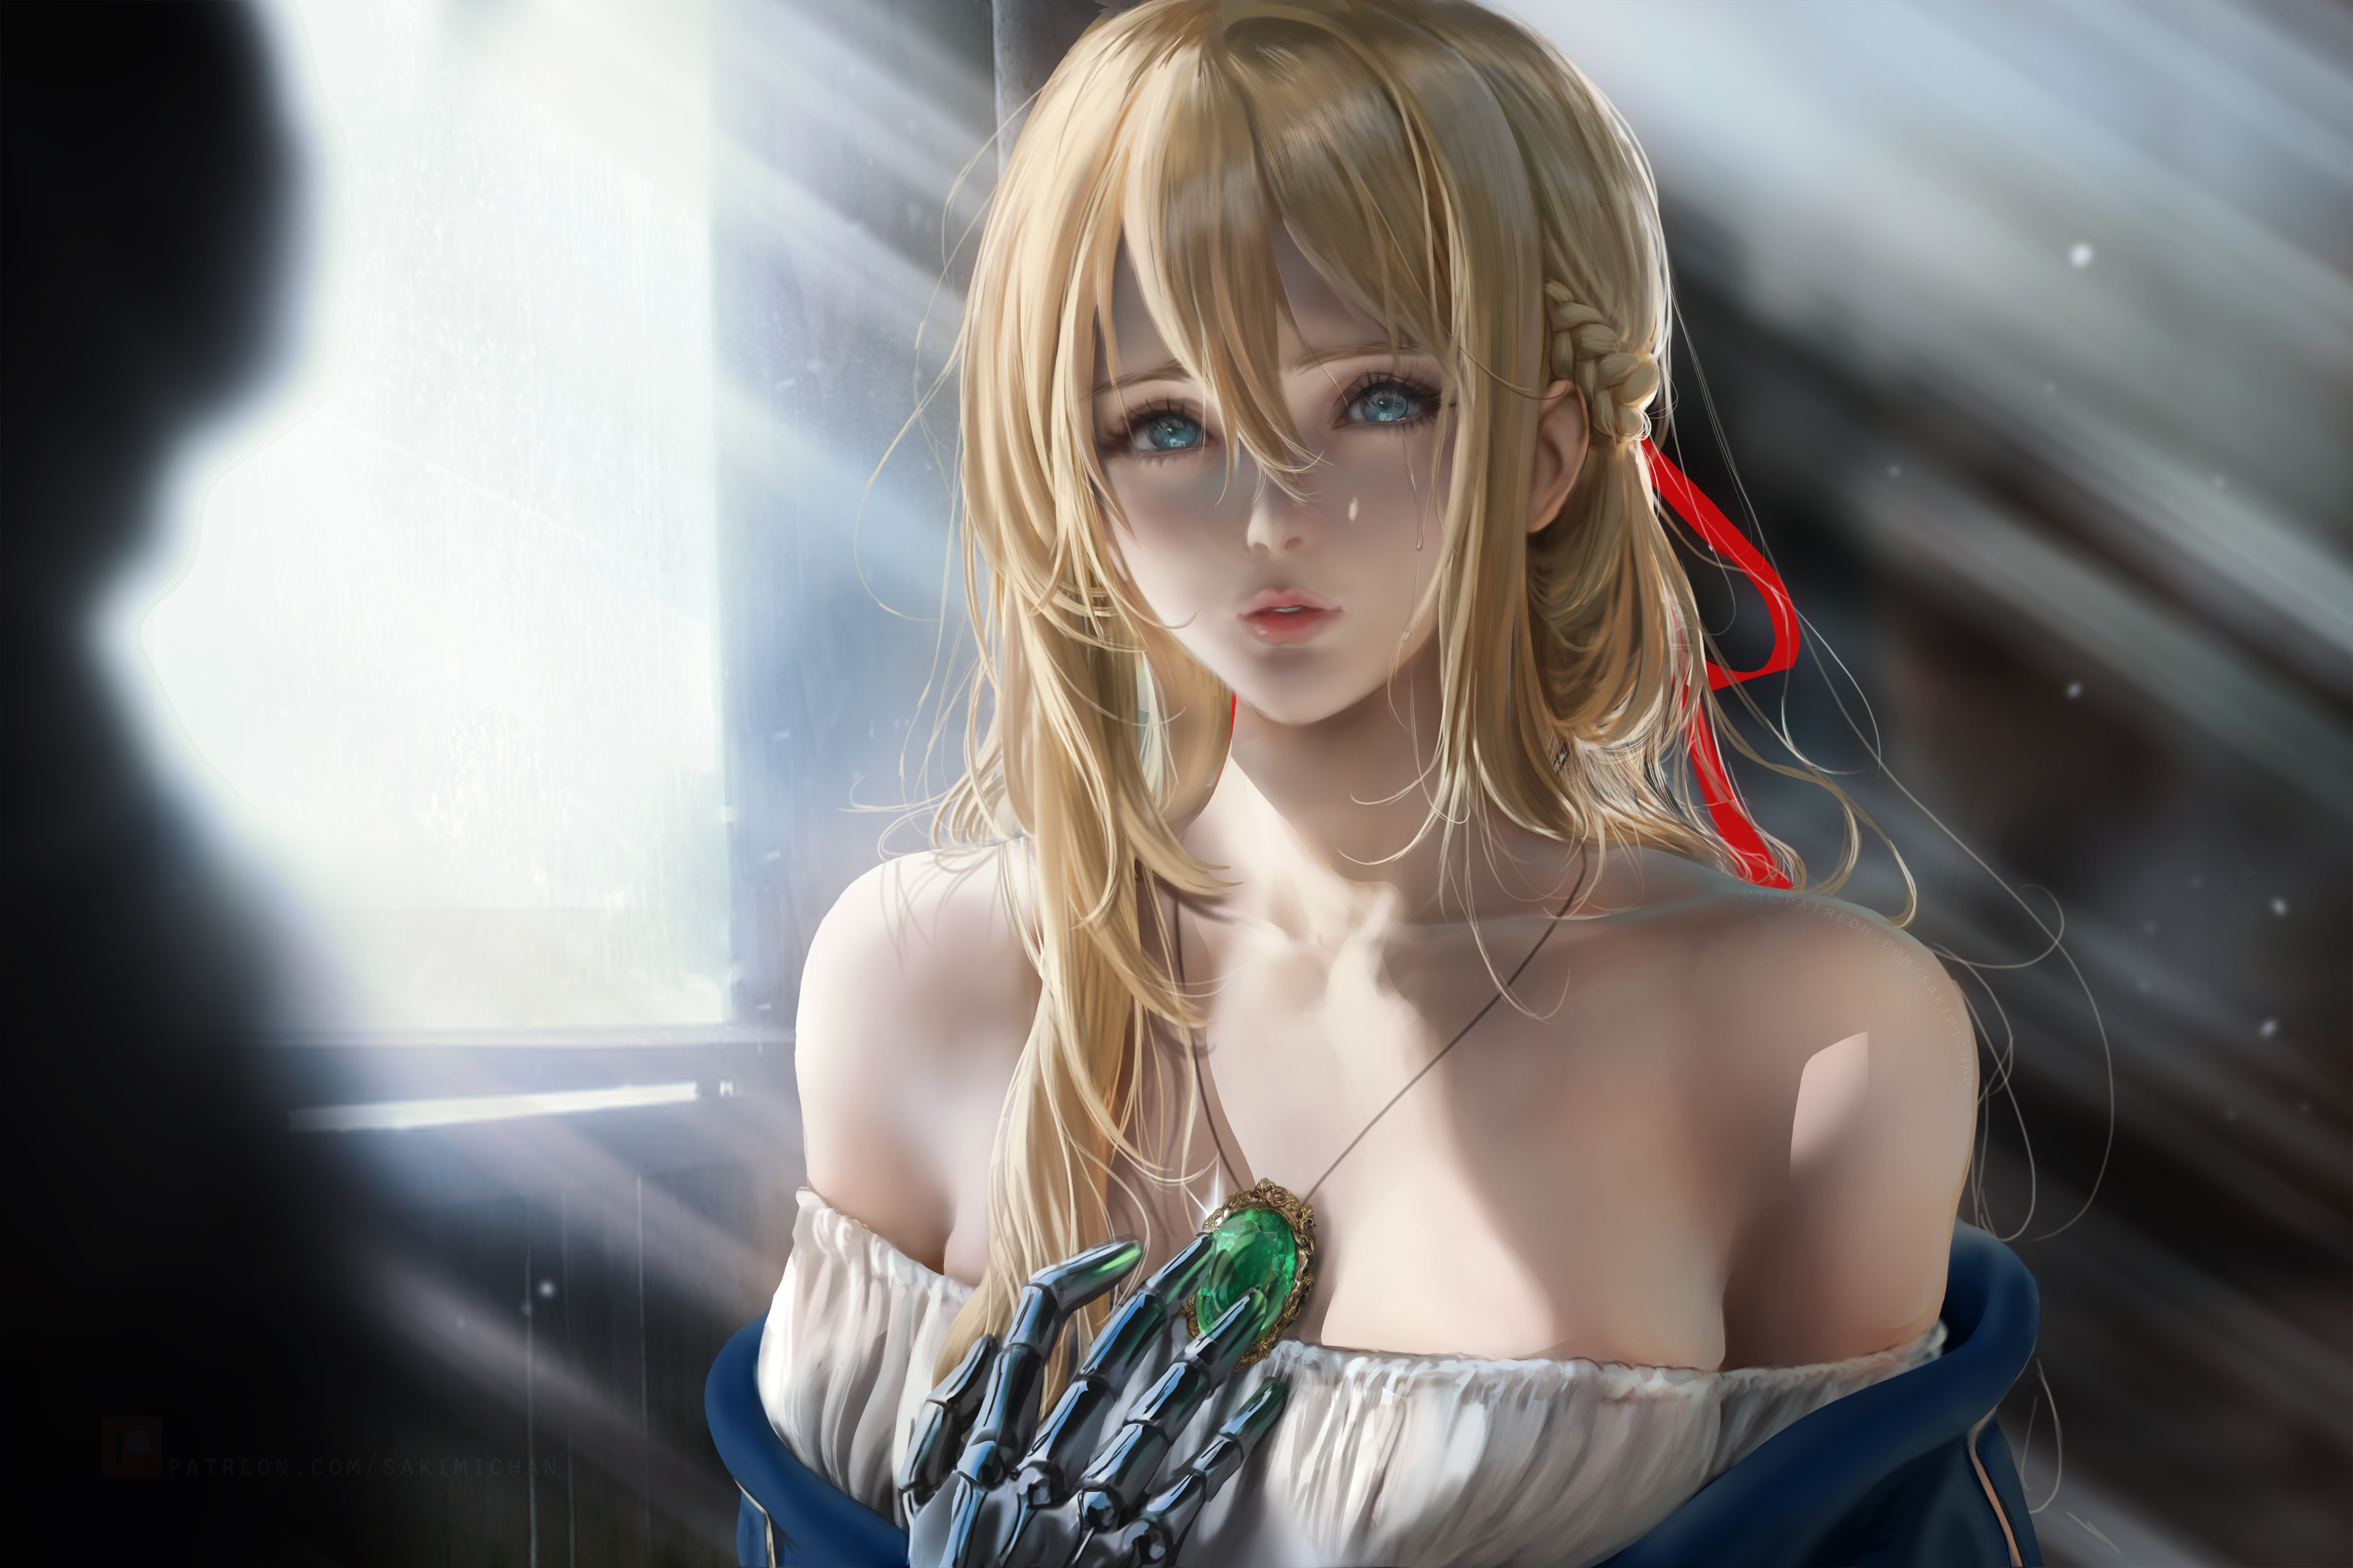 Wallpaper, Violet Evergarden, anime girls, blonde, bangs, long hair, Braided hair, hair ribbon, looking at viewer, portrait, blue eyes, crying, tears, necklace, bare shoulders, steampunk, window, sun rays, fantasy girl, artwork